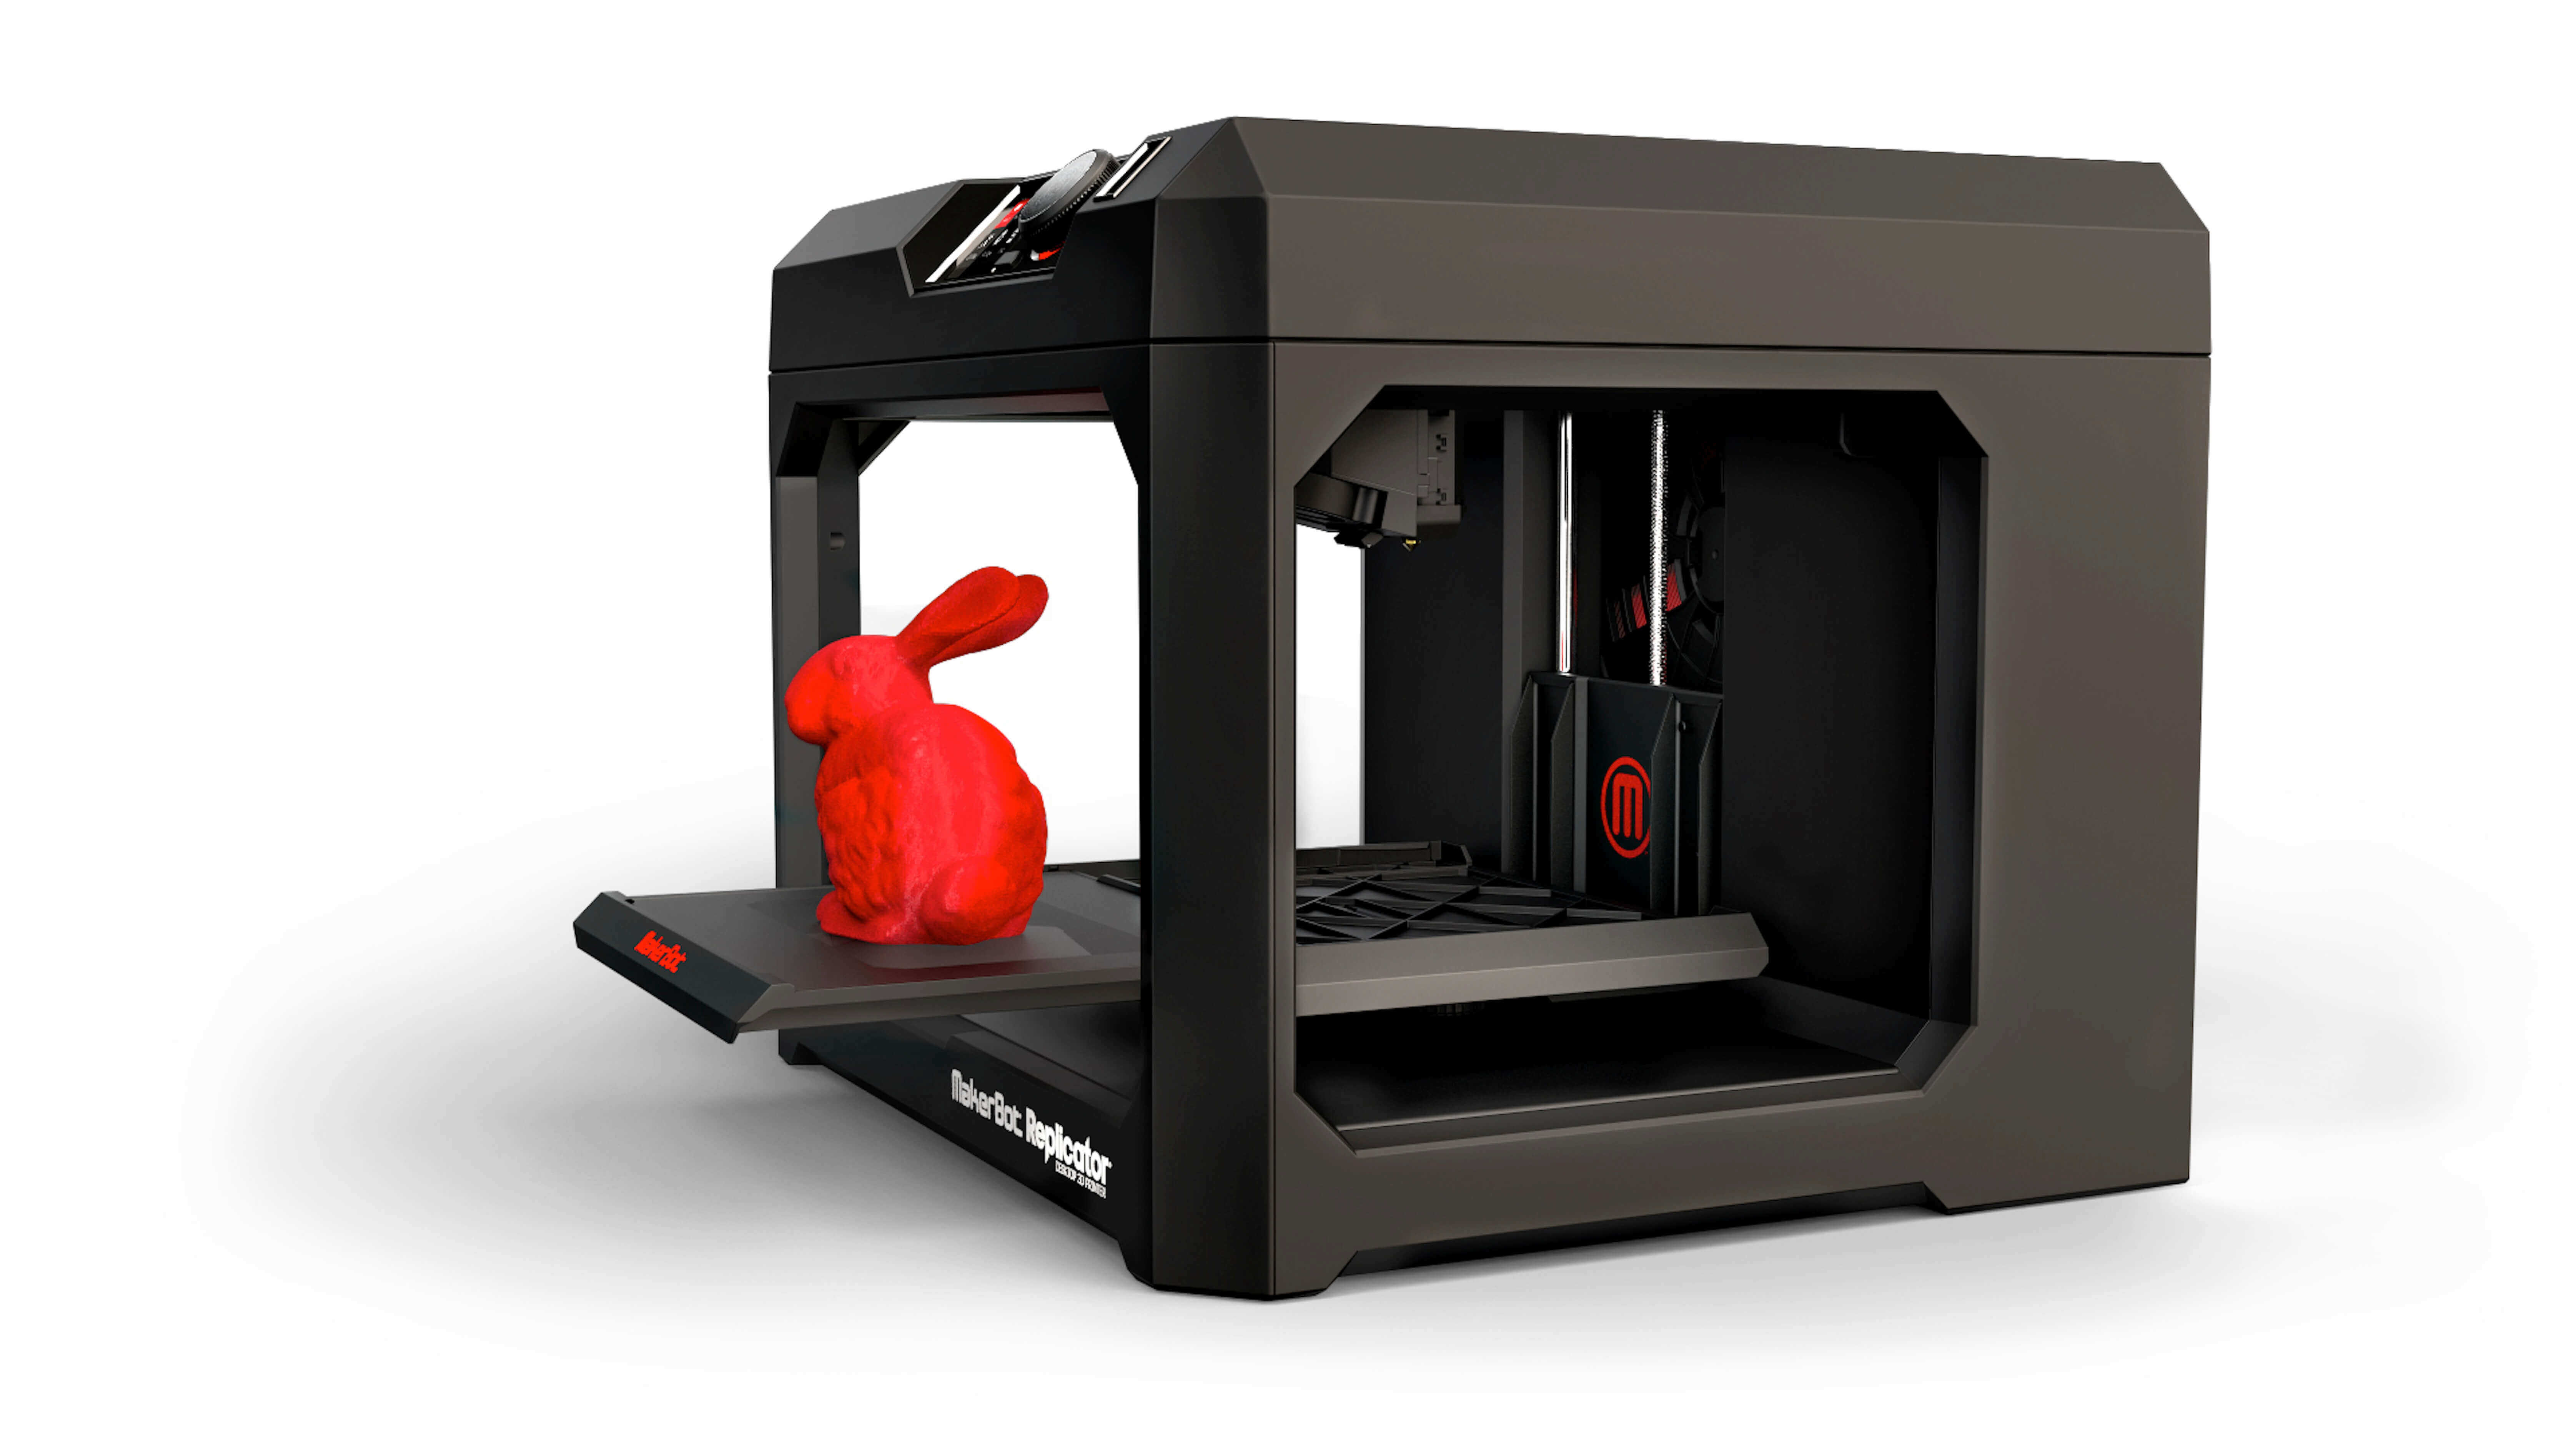 MakerBot Replicator 5th Gen brings convenience for a hefty price 